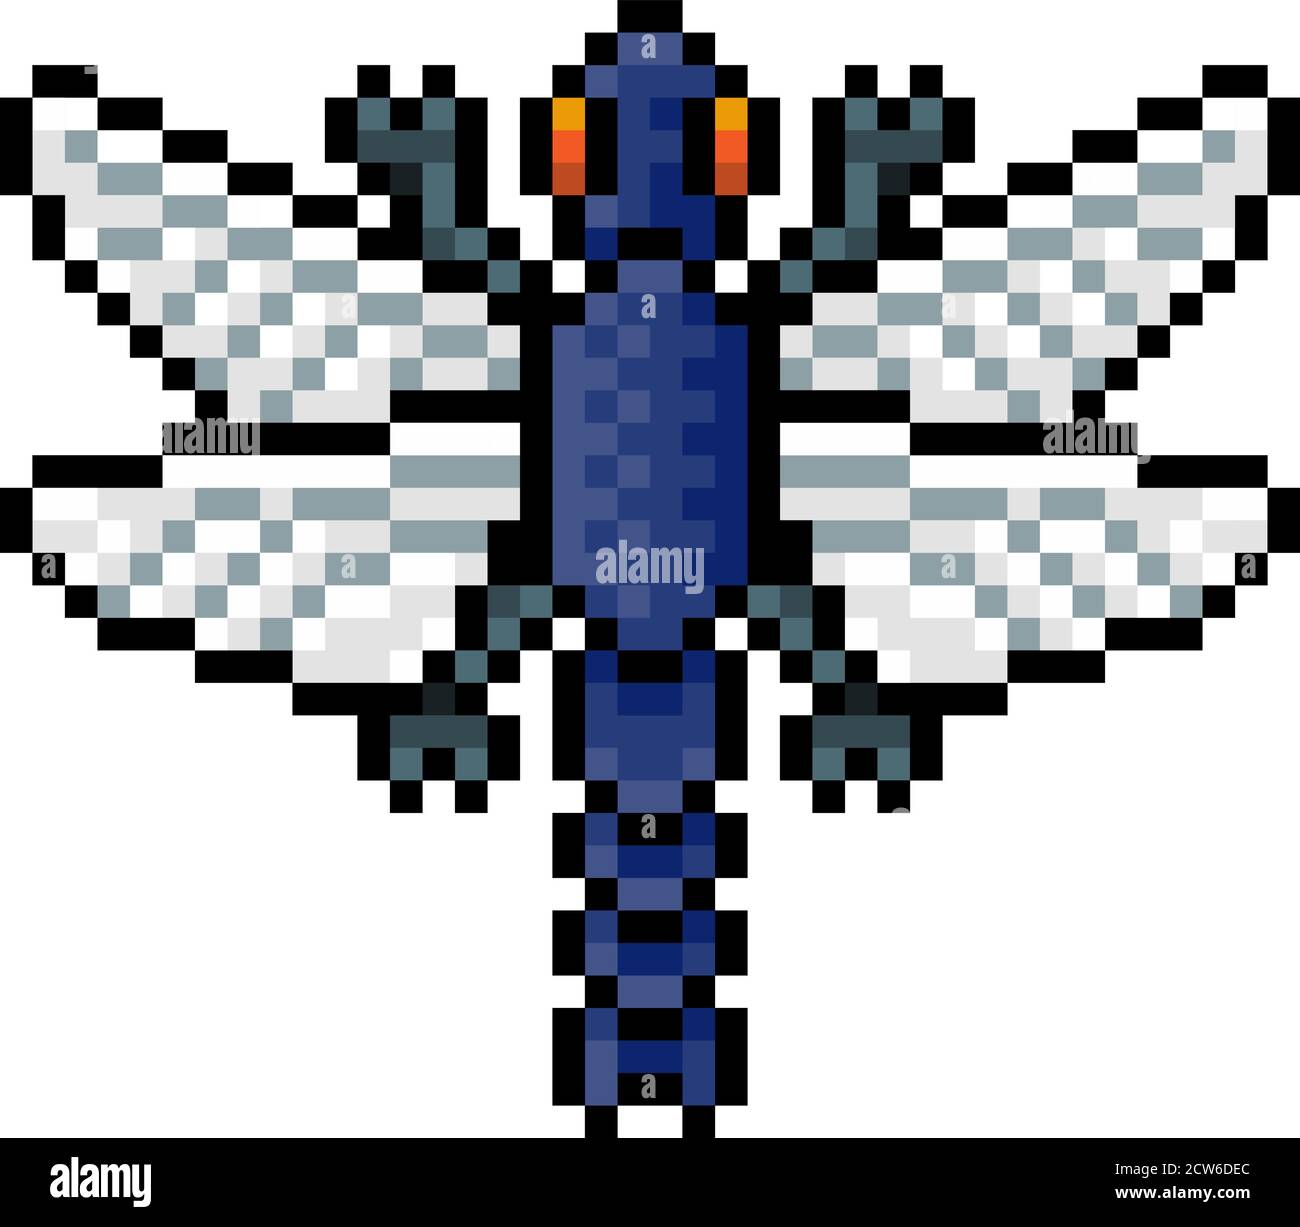 Dragonfly Bug Insect pixel Art Video Game icona Illustrazione Vettoriale